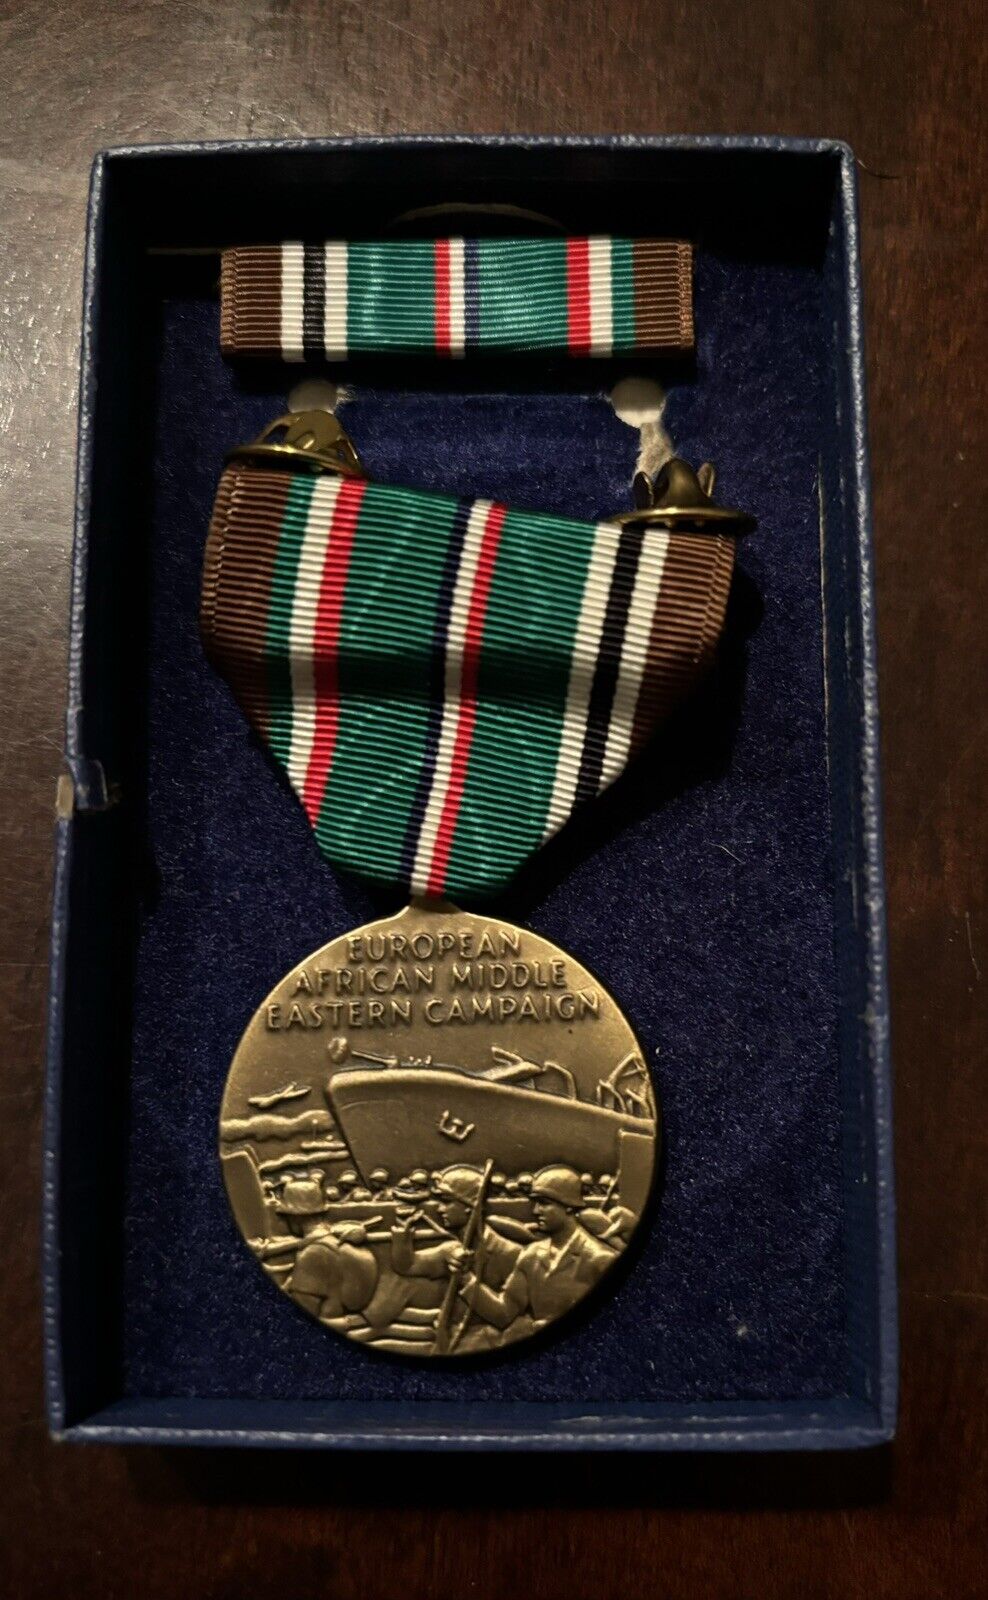 WWII European African Middle Eastern Campaign Medal & Ribbon Bar w original box